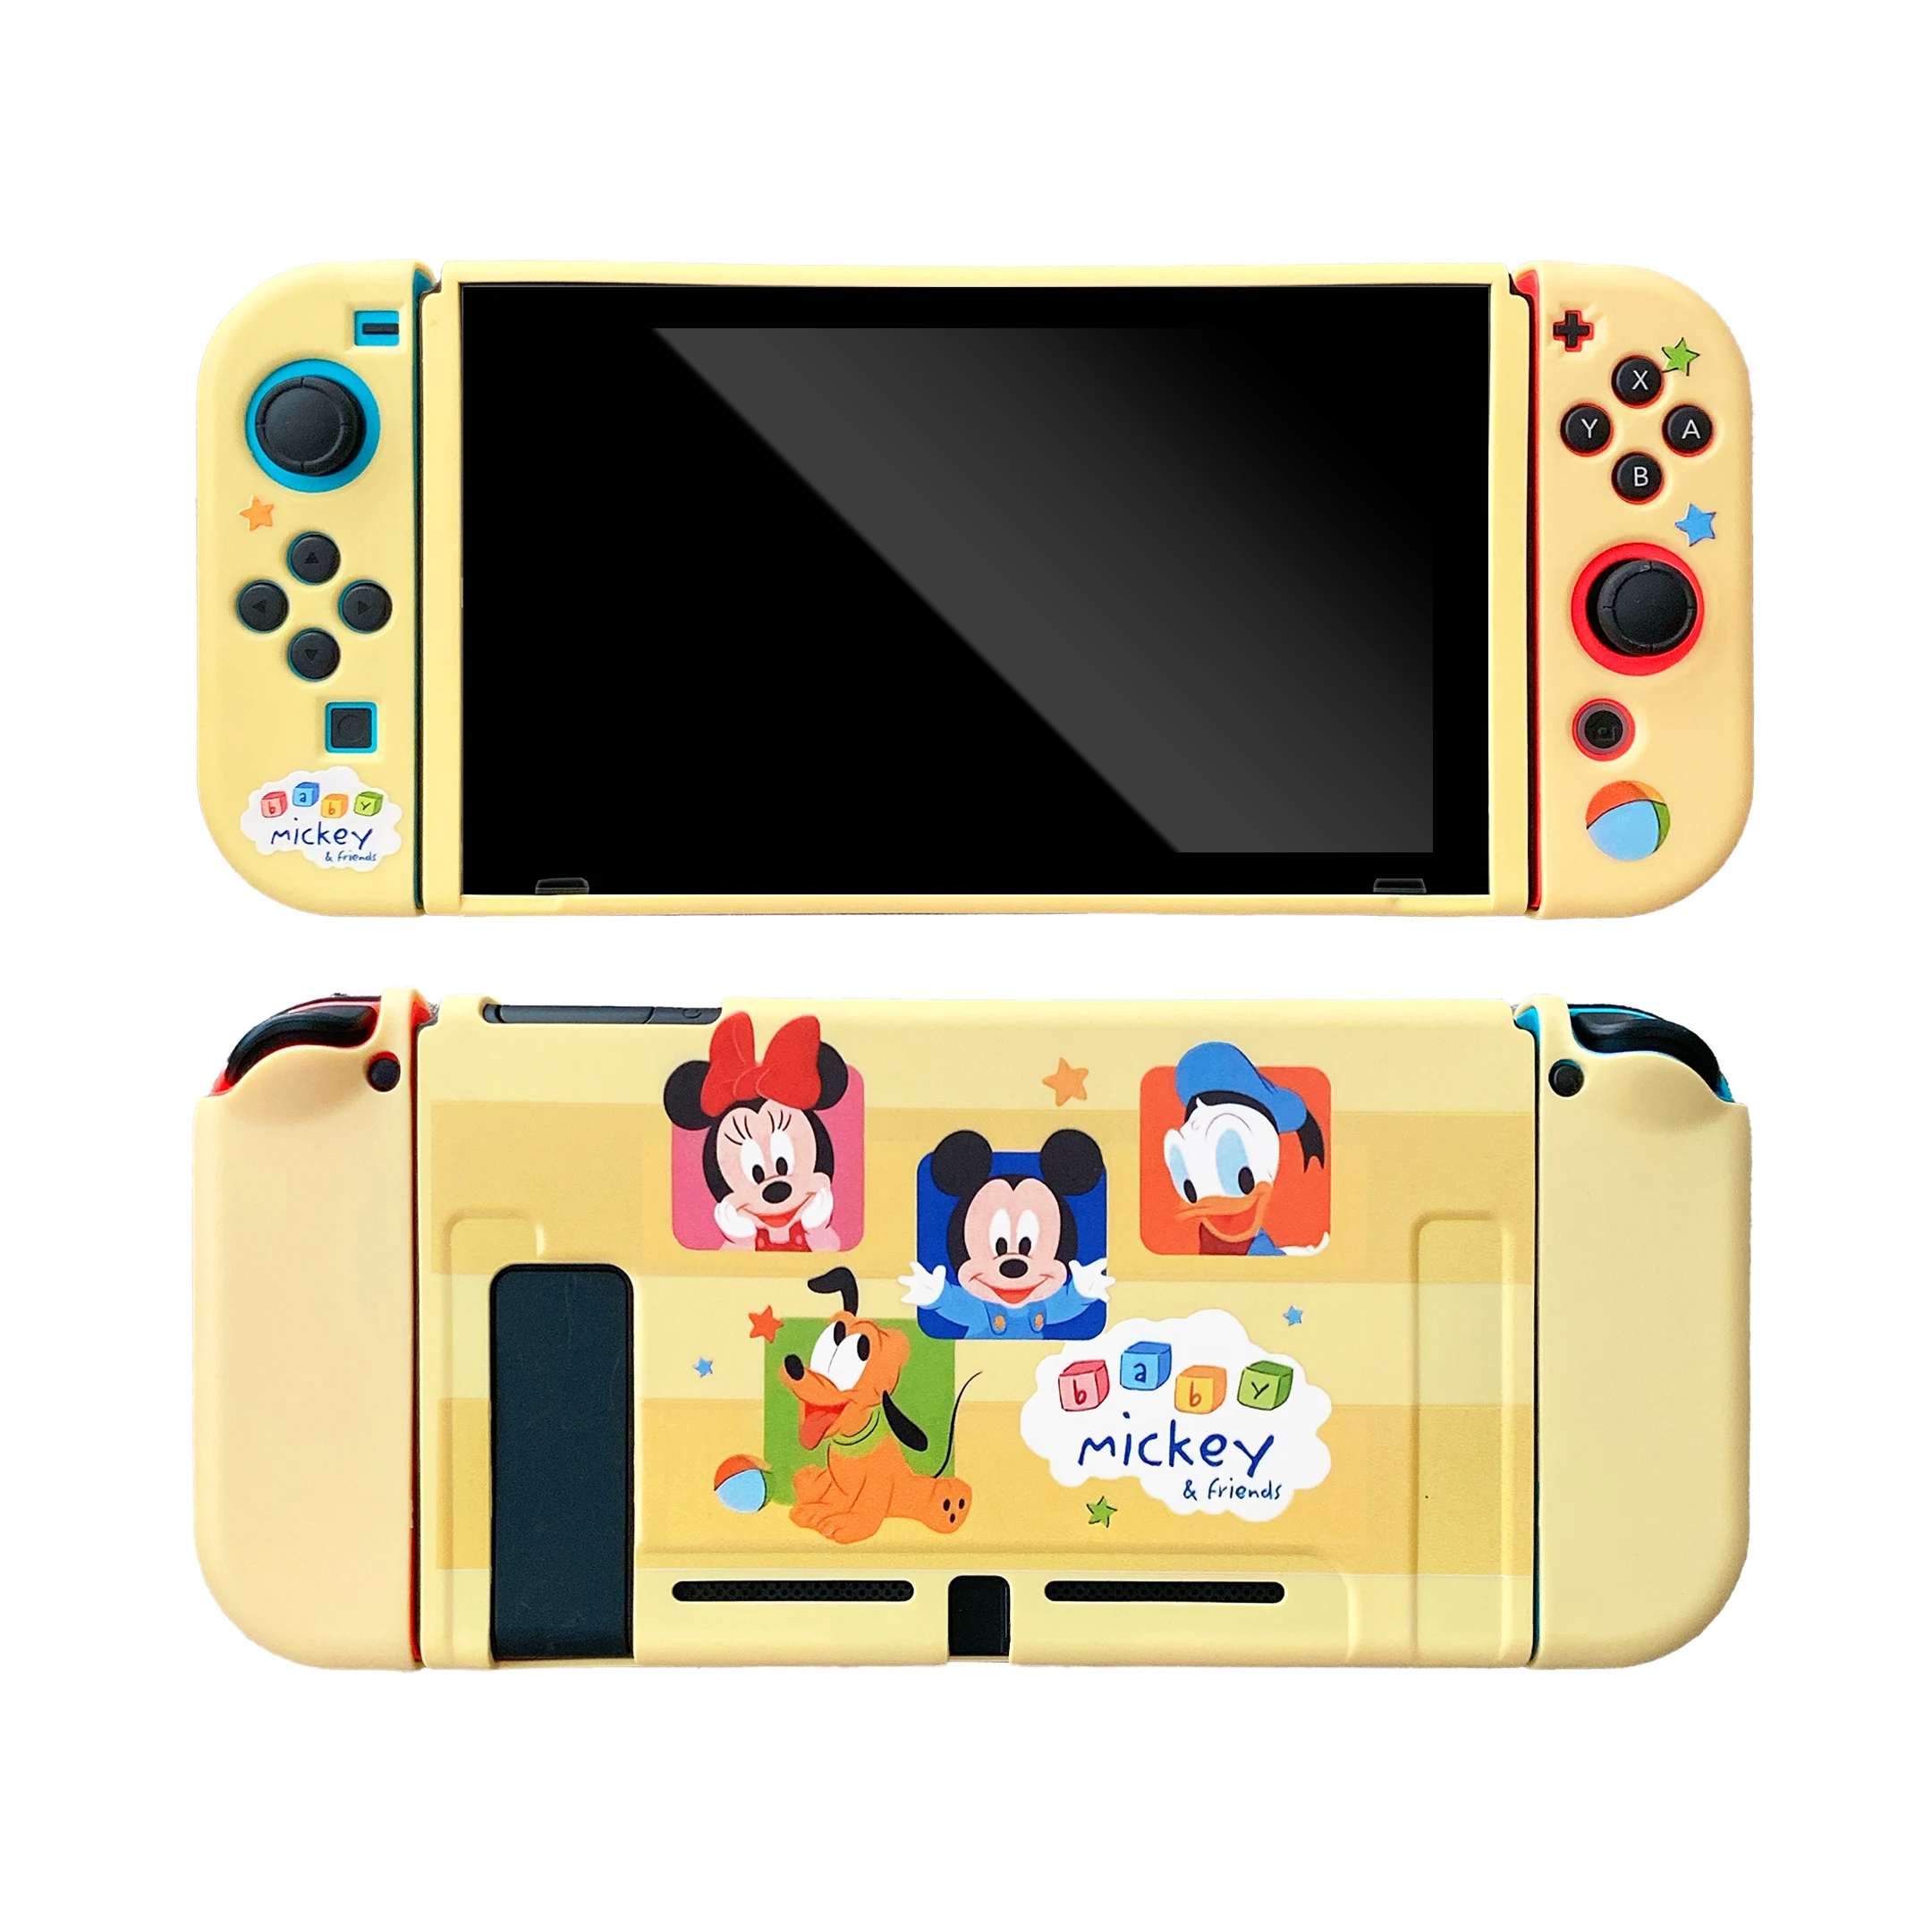 

Disney Goofy Mickey Minnie Mouse XO Soft Phone Cases For Nintendo Switch Game Console Controller OLED Gaming Accessories